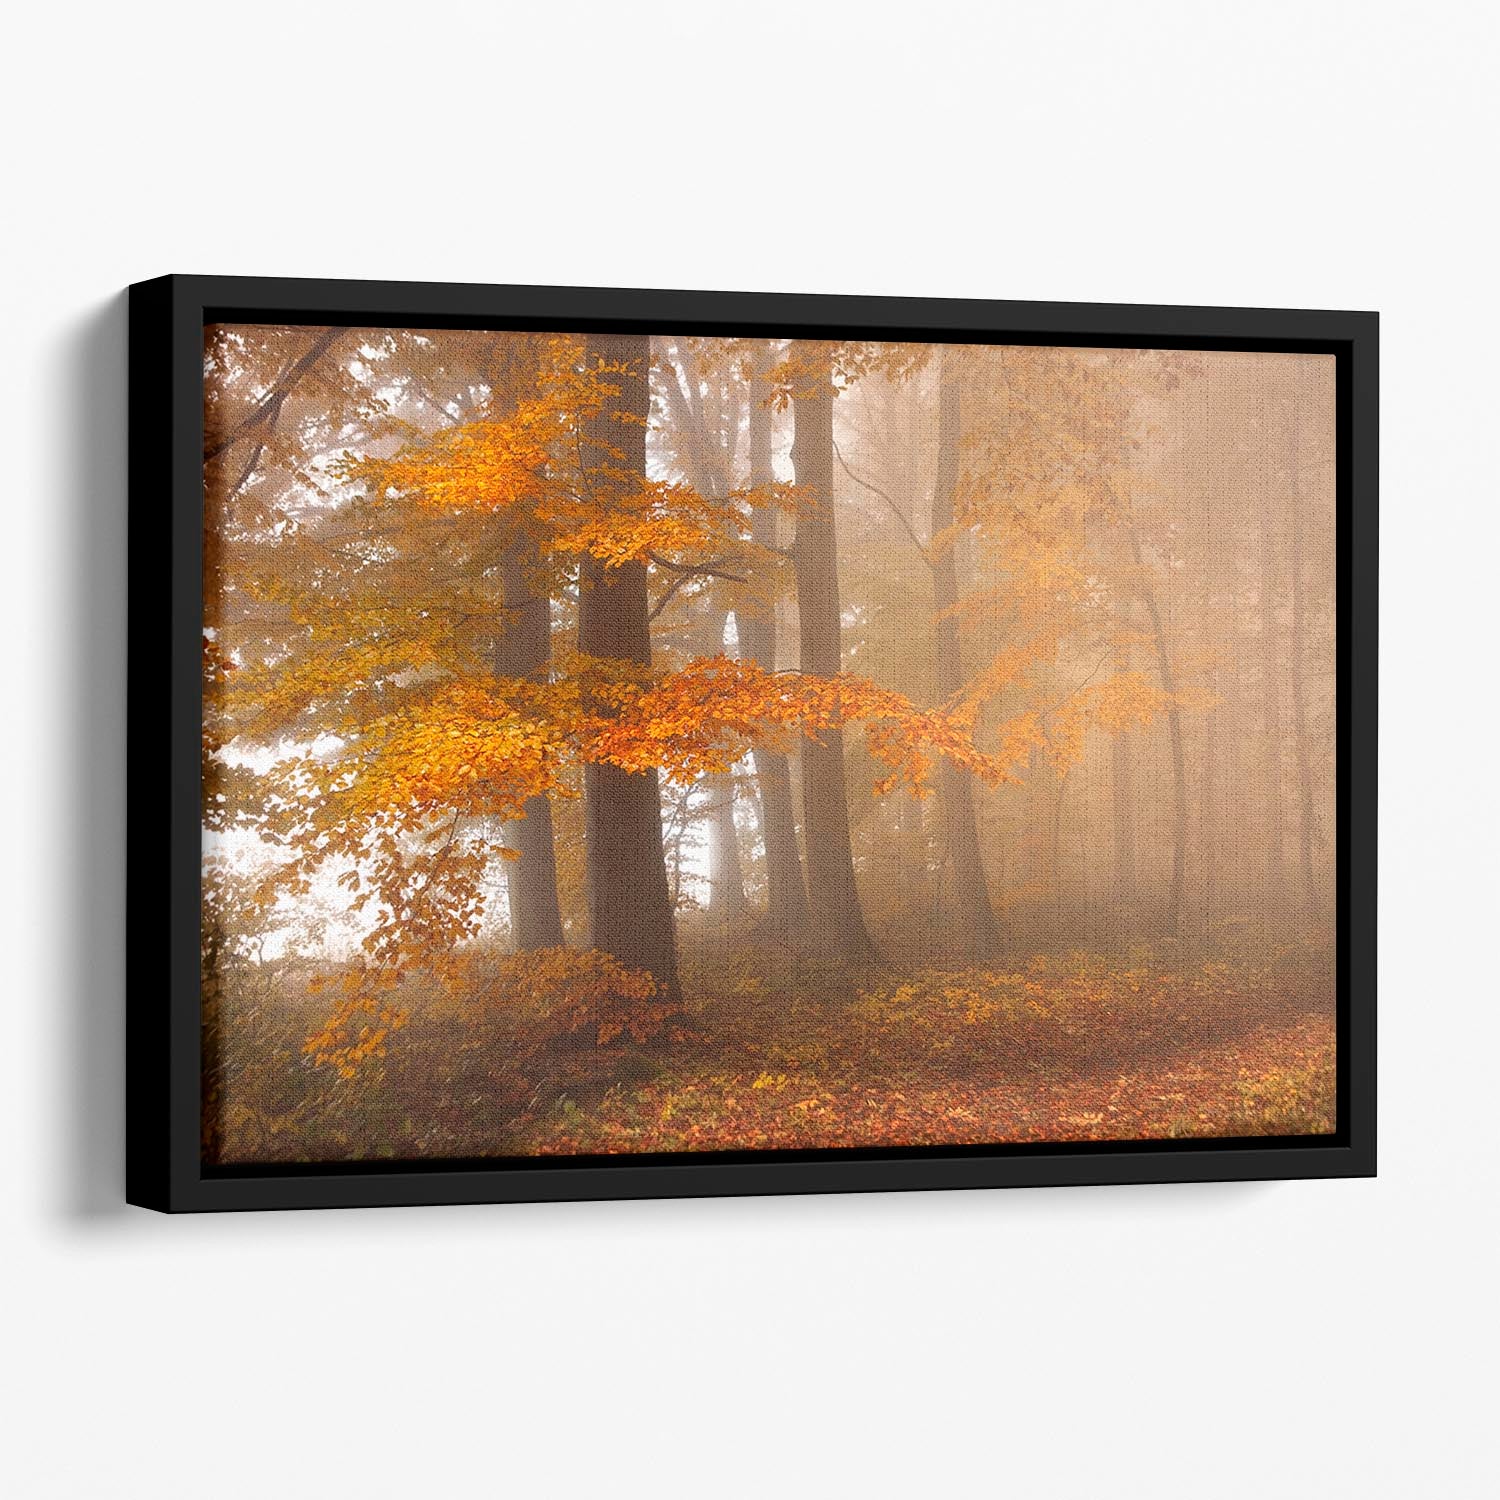 Edge Of The Woods Floating Framed Canvas - Canvas Art Rocks - 1